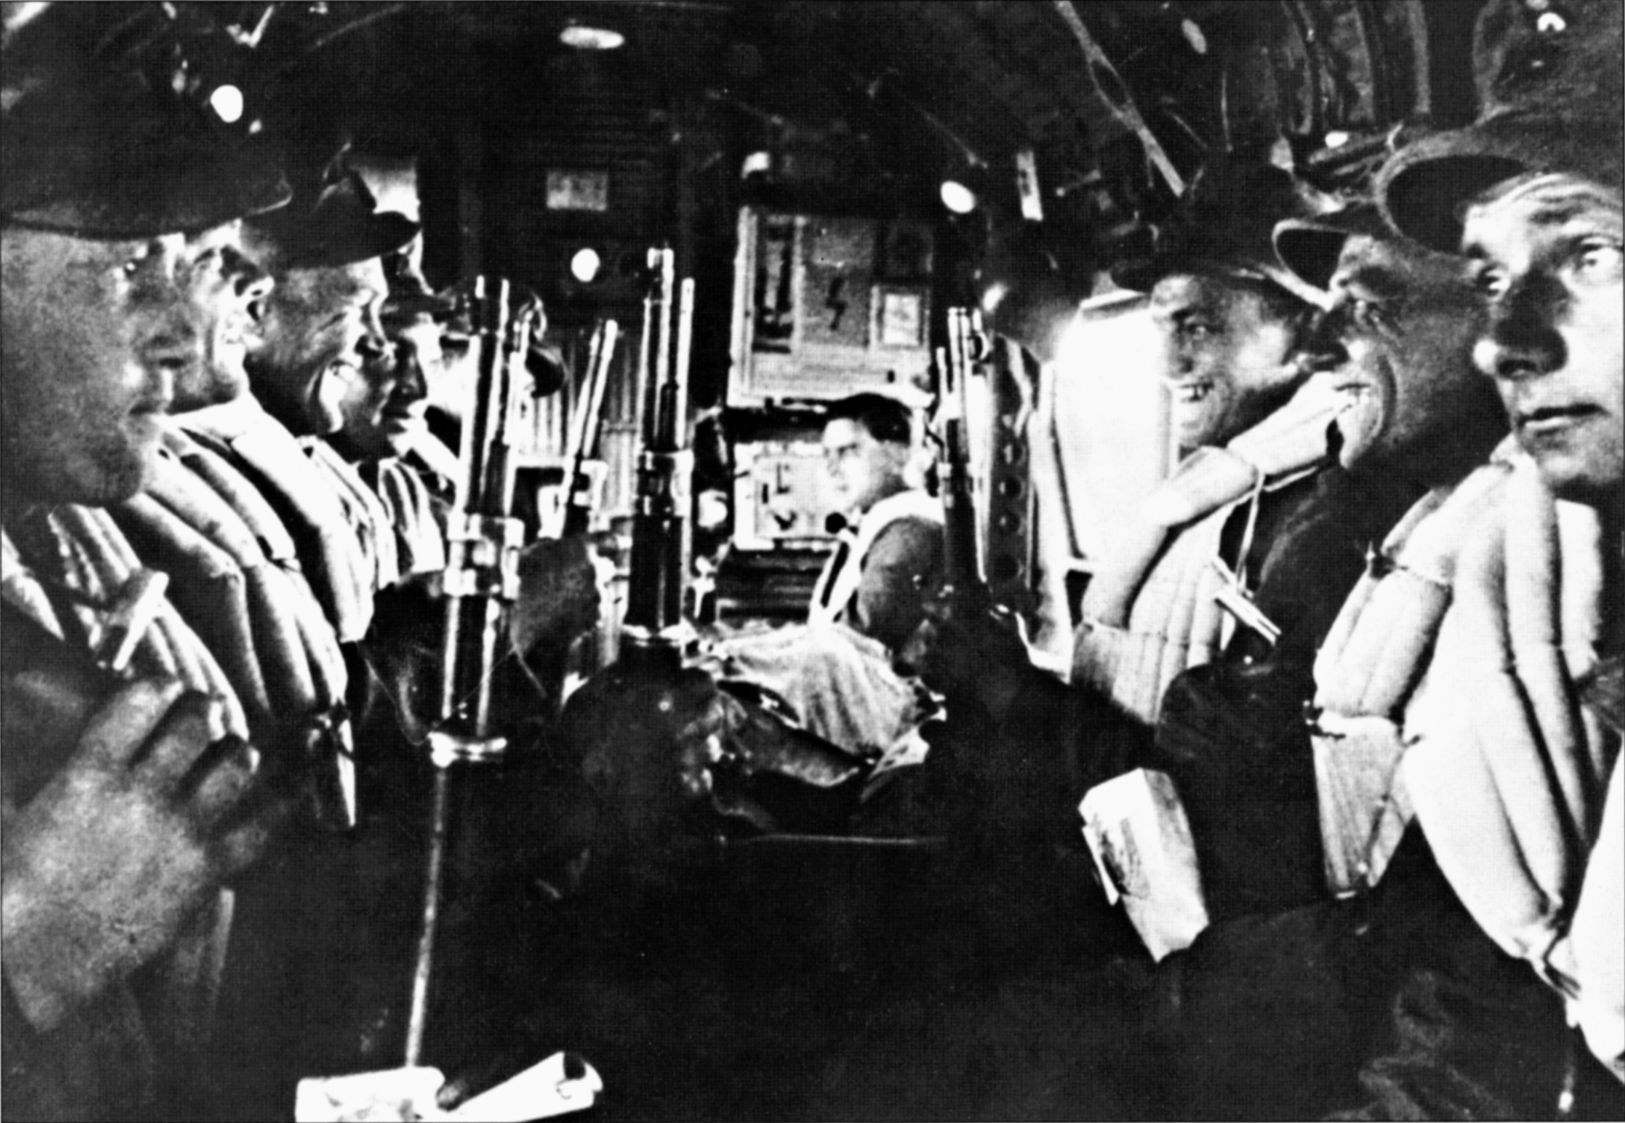 German airborne troops are seated inside their Ju-52 transport plane en route to drop zones on  Crete. The German paratroopers suffered horrendous casualties during the invasion but eventually secured the island after several days of hard fighting. 